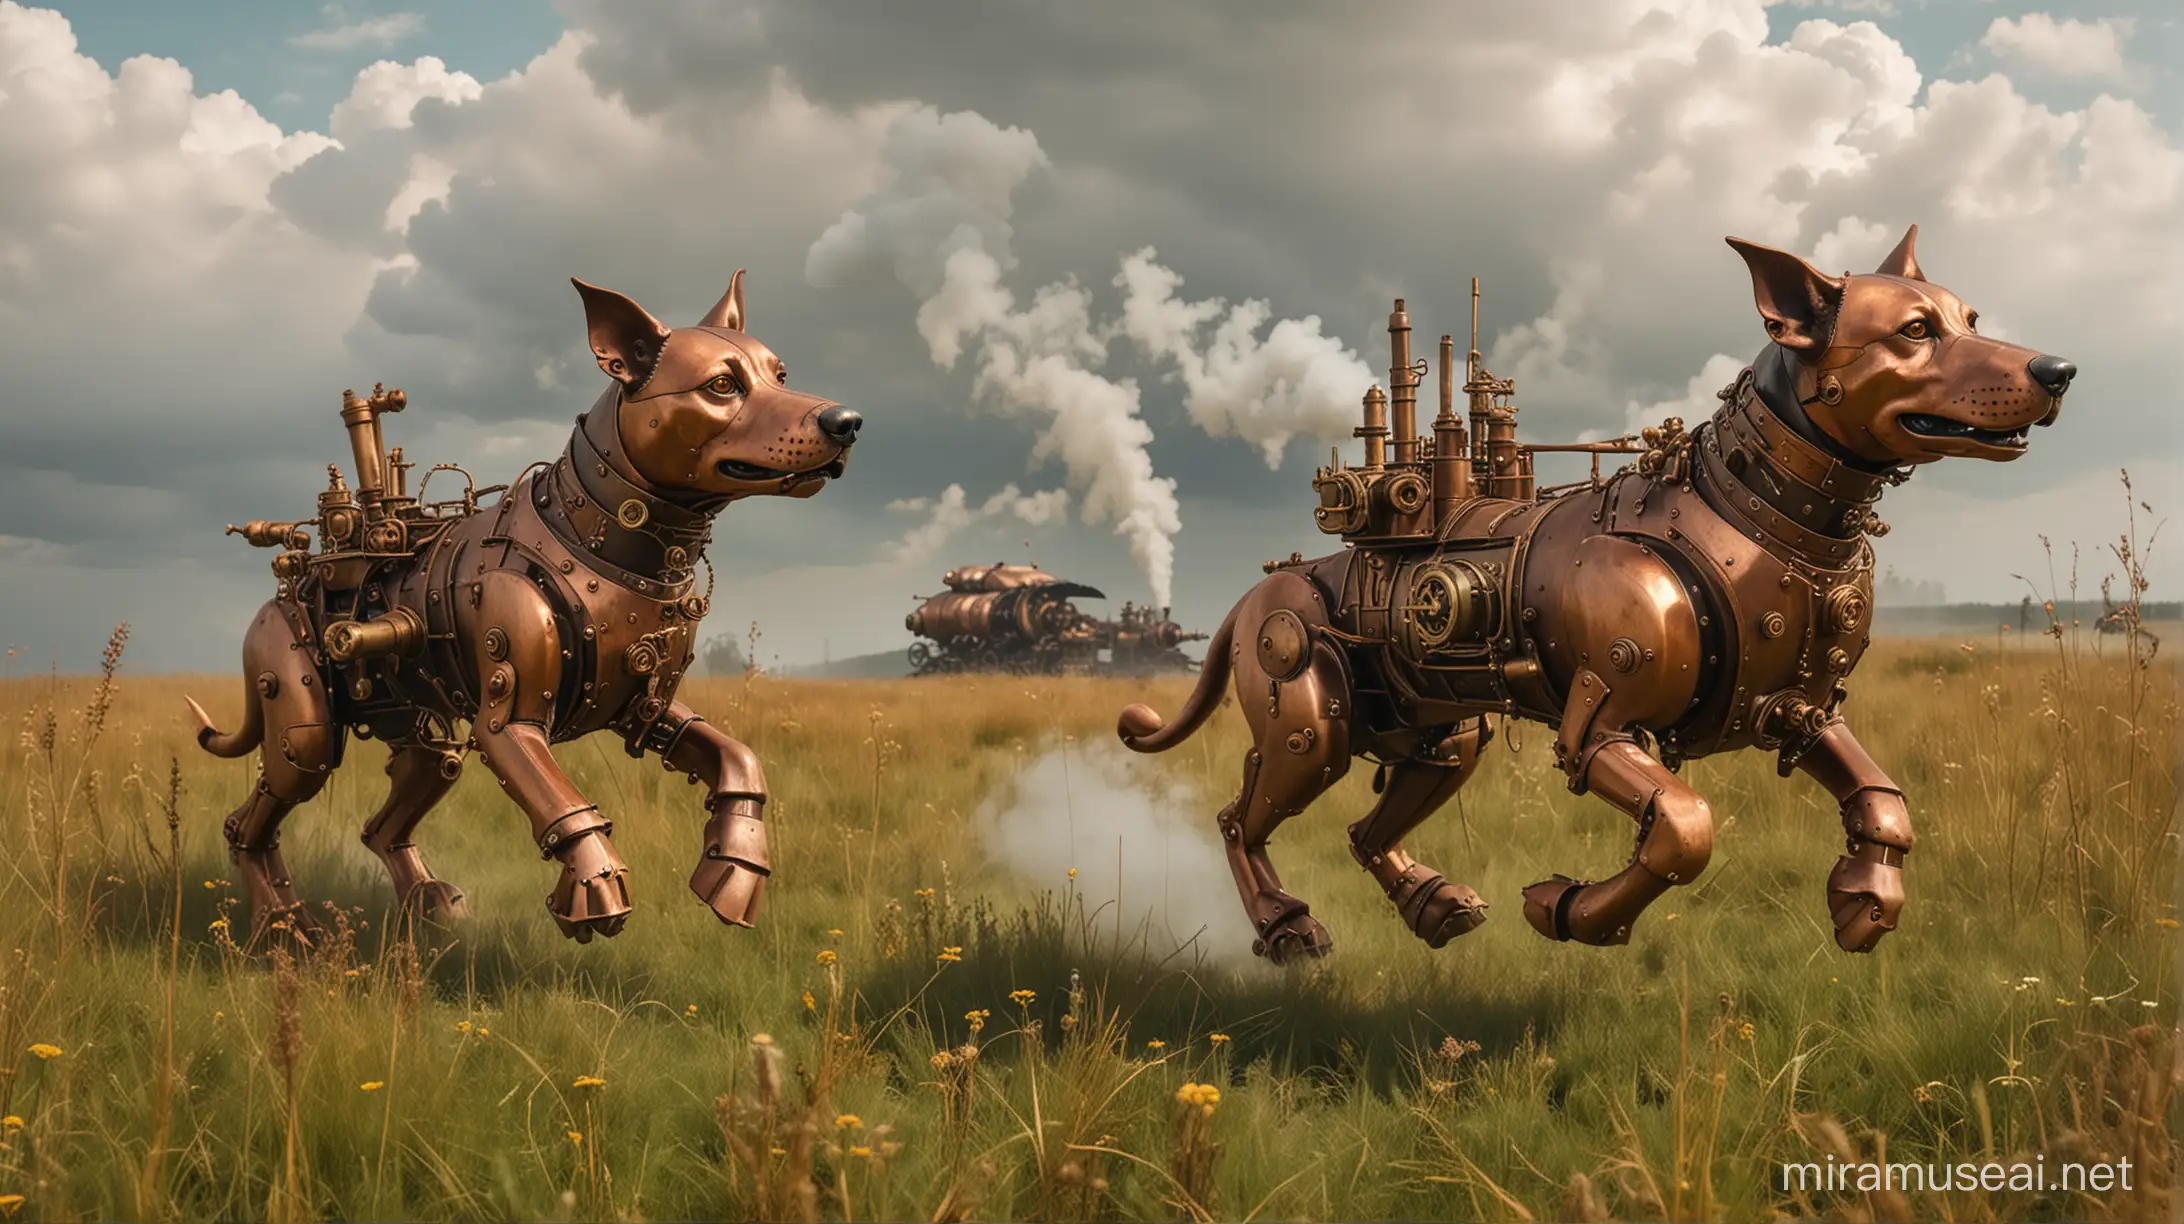 Steampunk Mechanical Dogs Racing Through Meadow Amidst Steam and Smoke